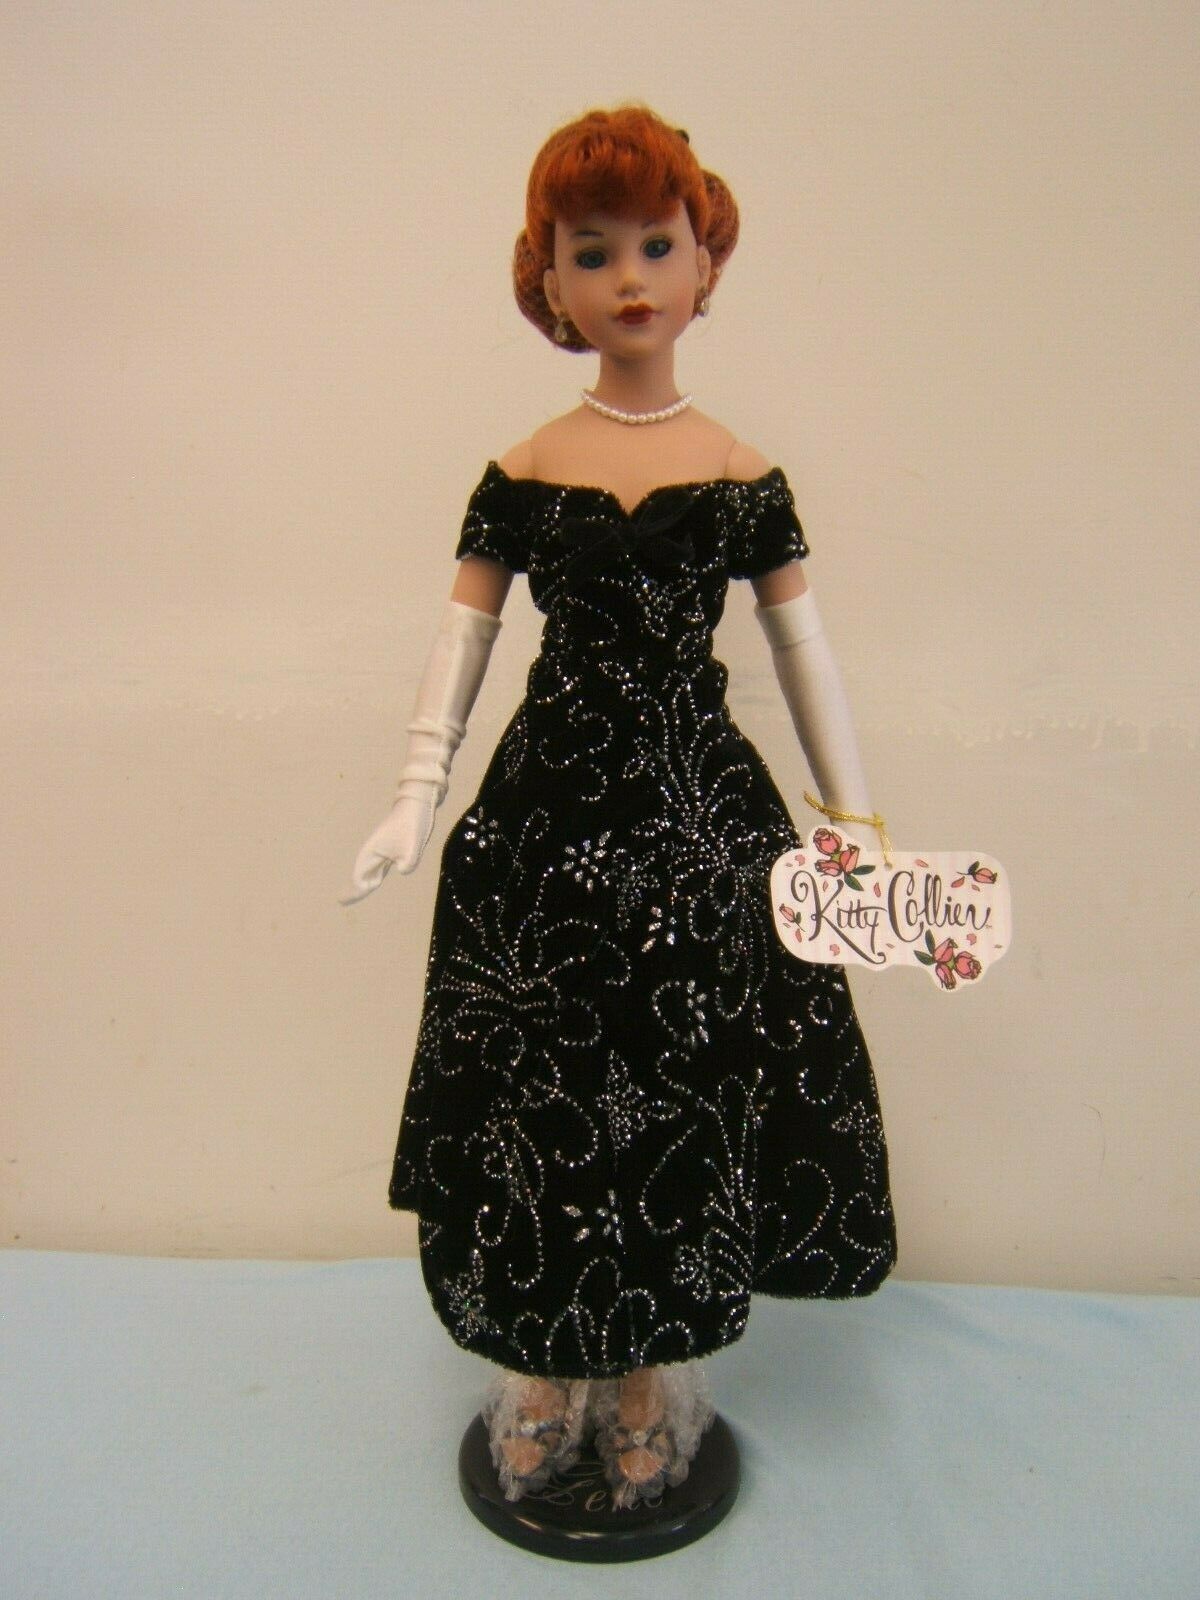 Robert Tonner Redhead 18" Kitty Collier Doll Black Sequin Outfit Dress 2000